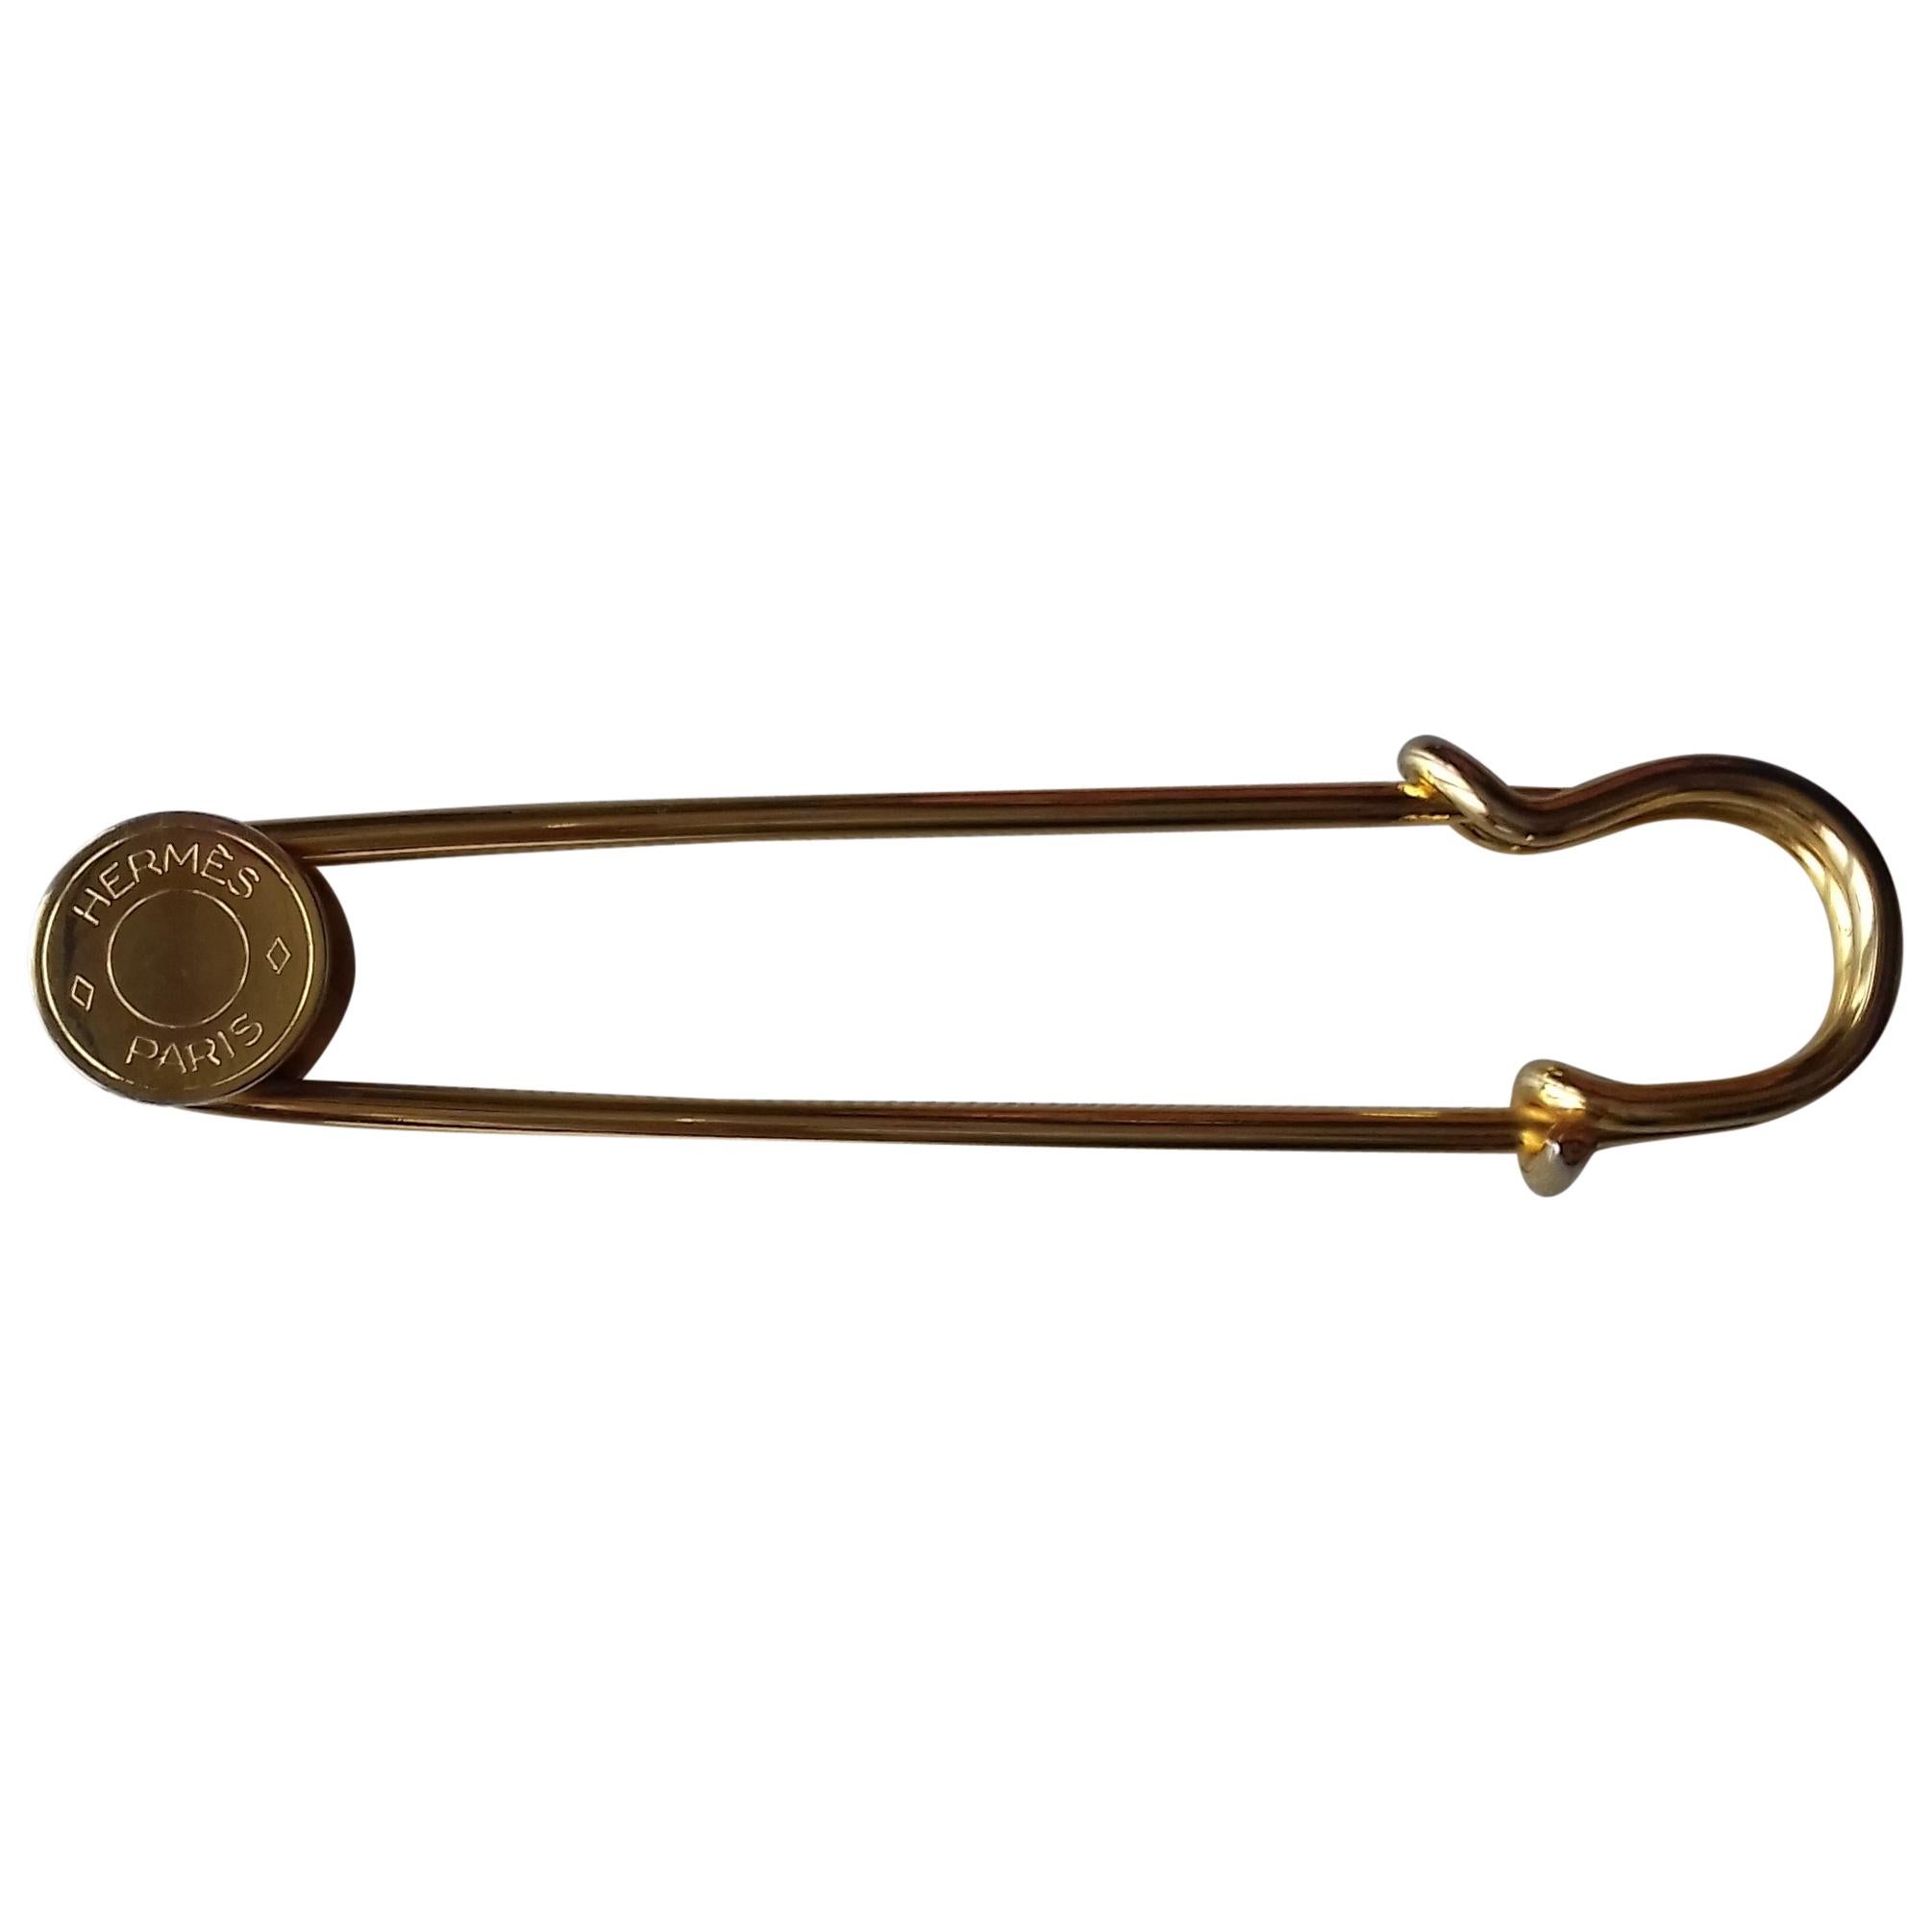 Hermès Long Safety Pin Brooch Clou de Selle in Golden Metal 3, 5 inches